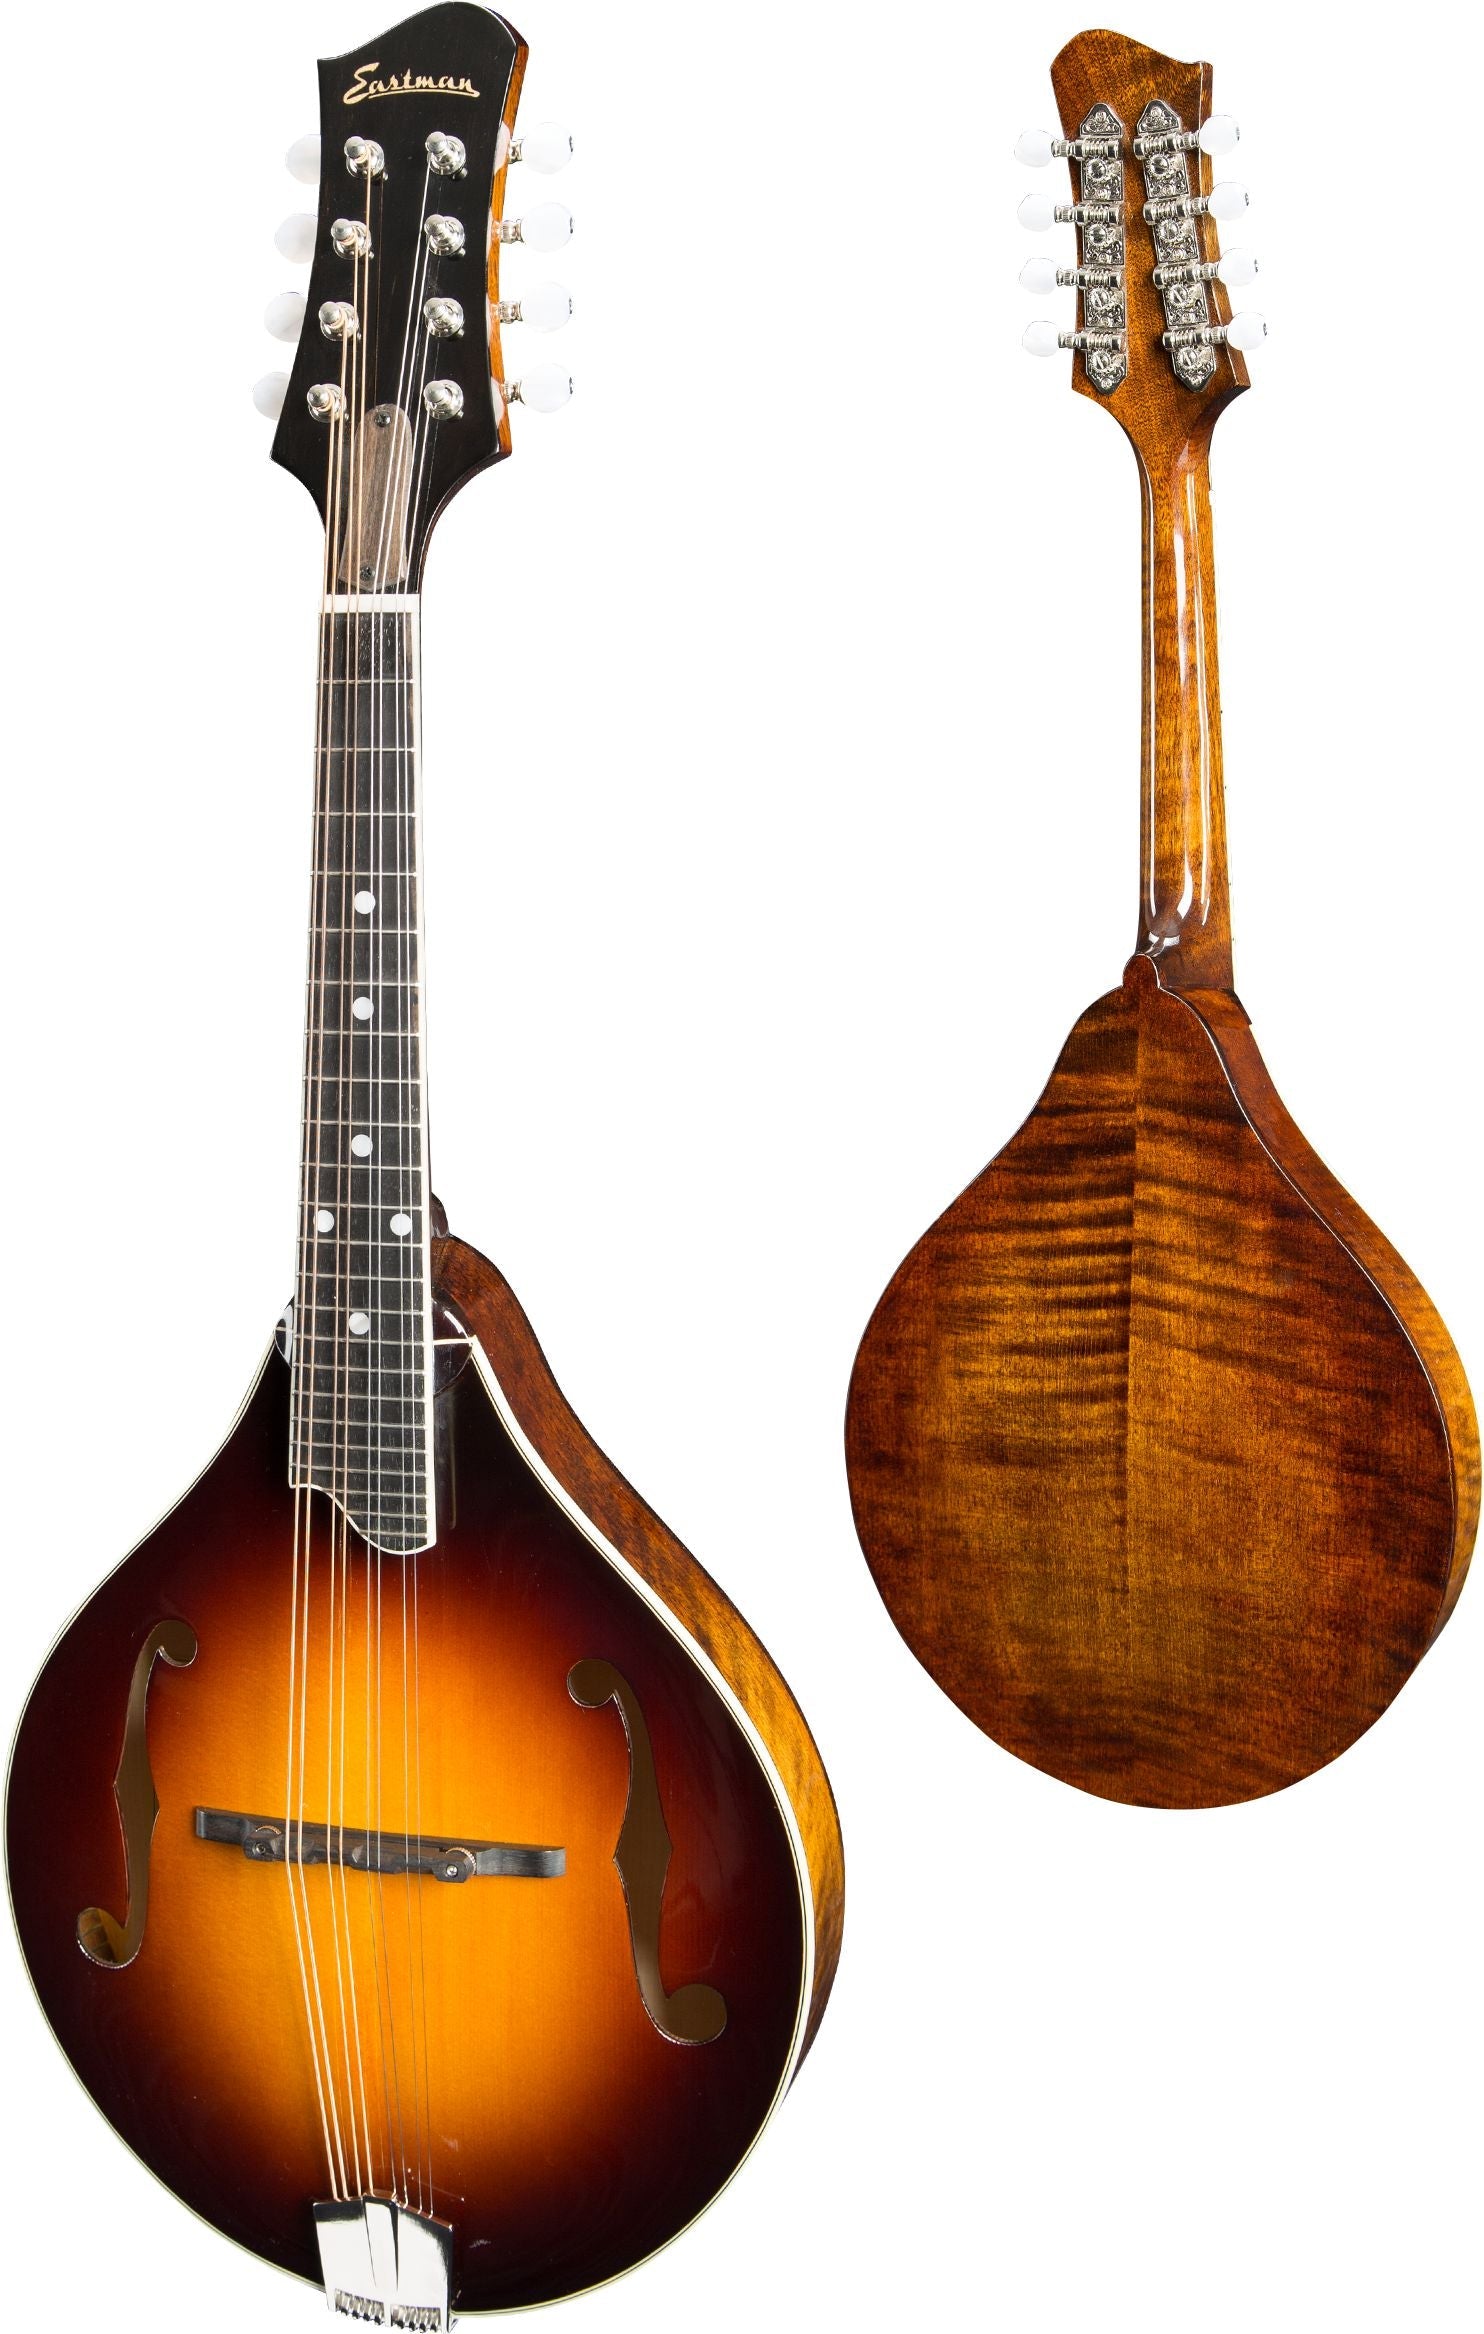 Eastman MD505-CS A-style F-holes Mandolin (Solid Spruce top, Solid Maple back and sides, w/Case), Mandolin for sale at Richards Guitars.